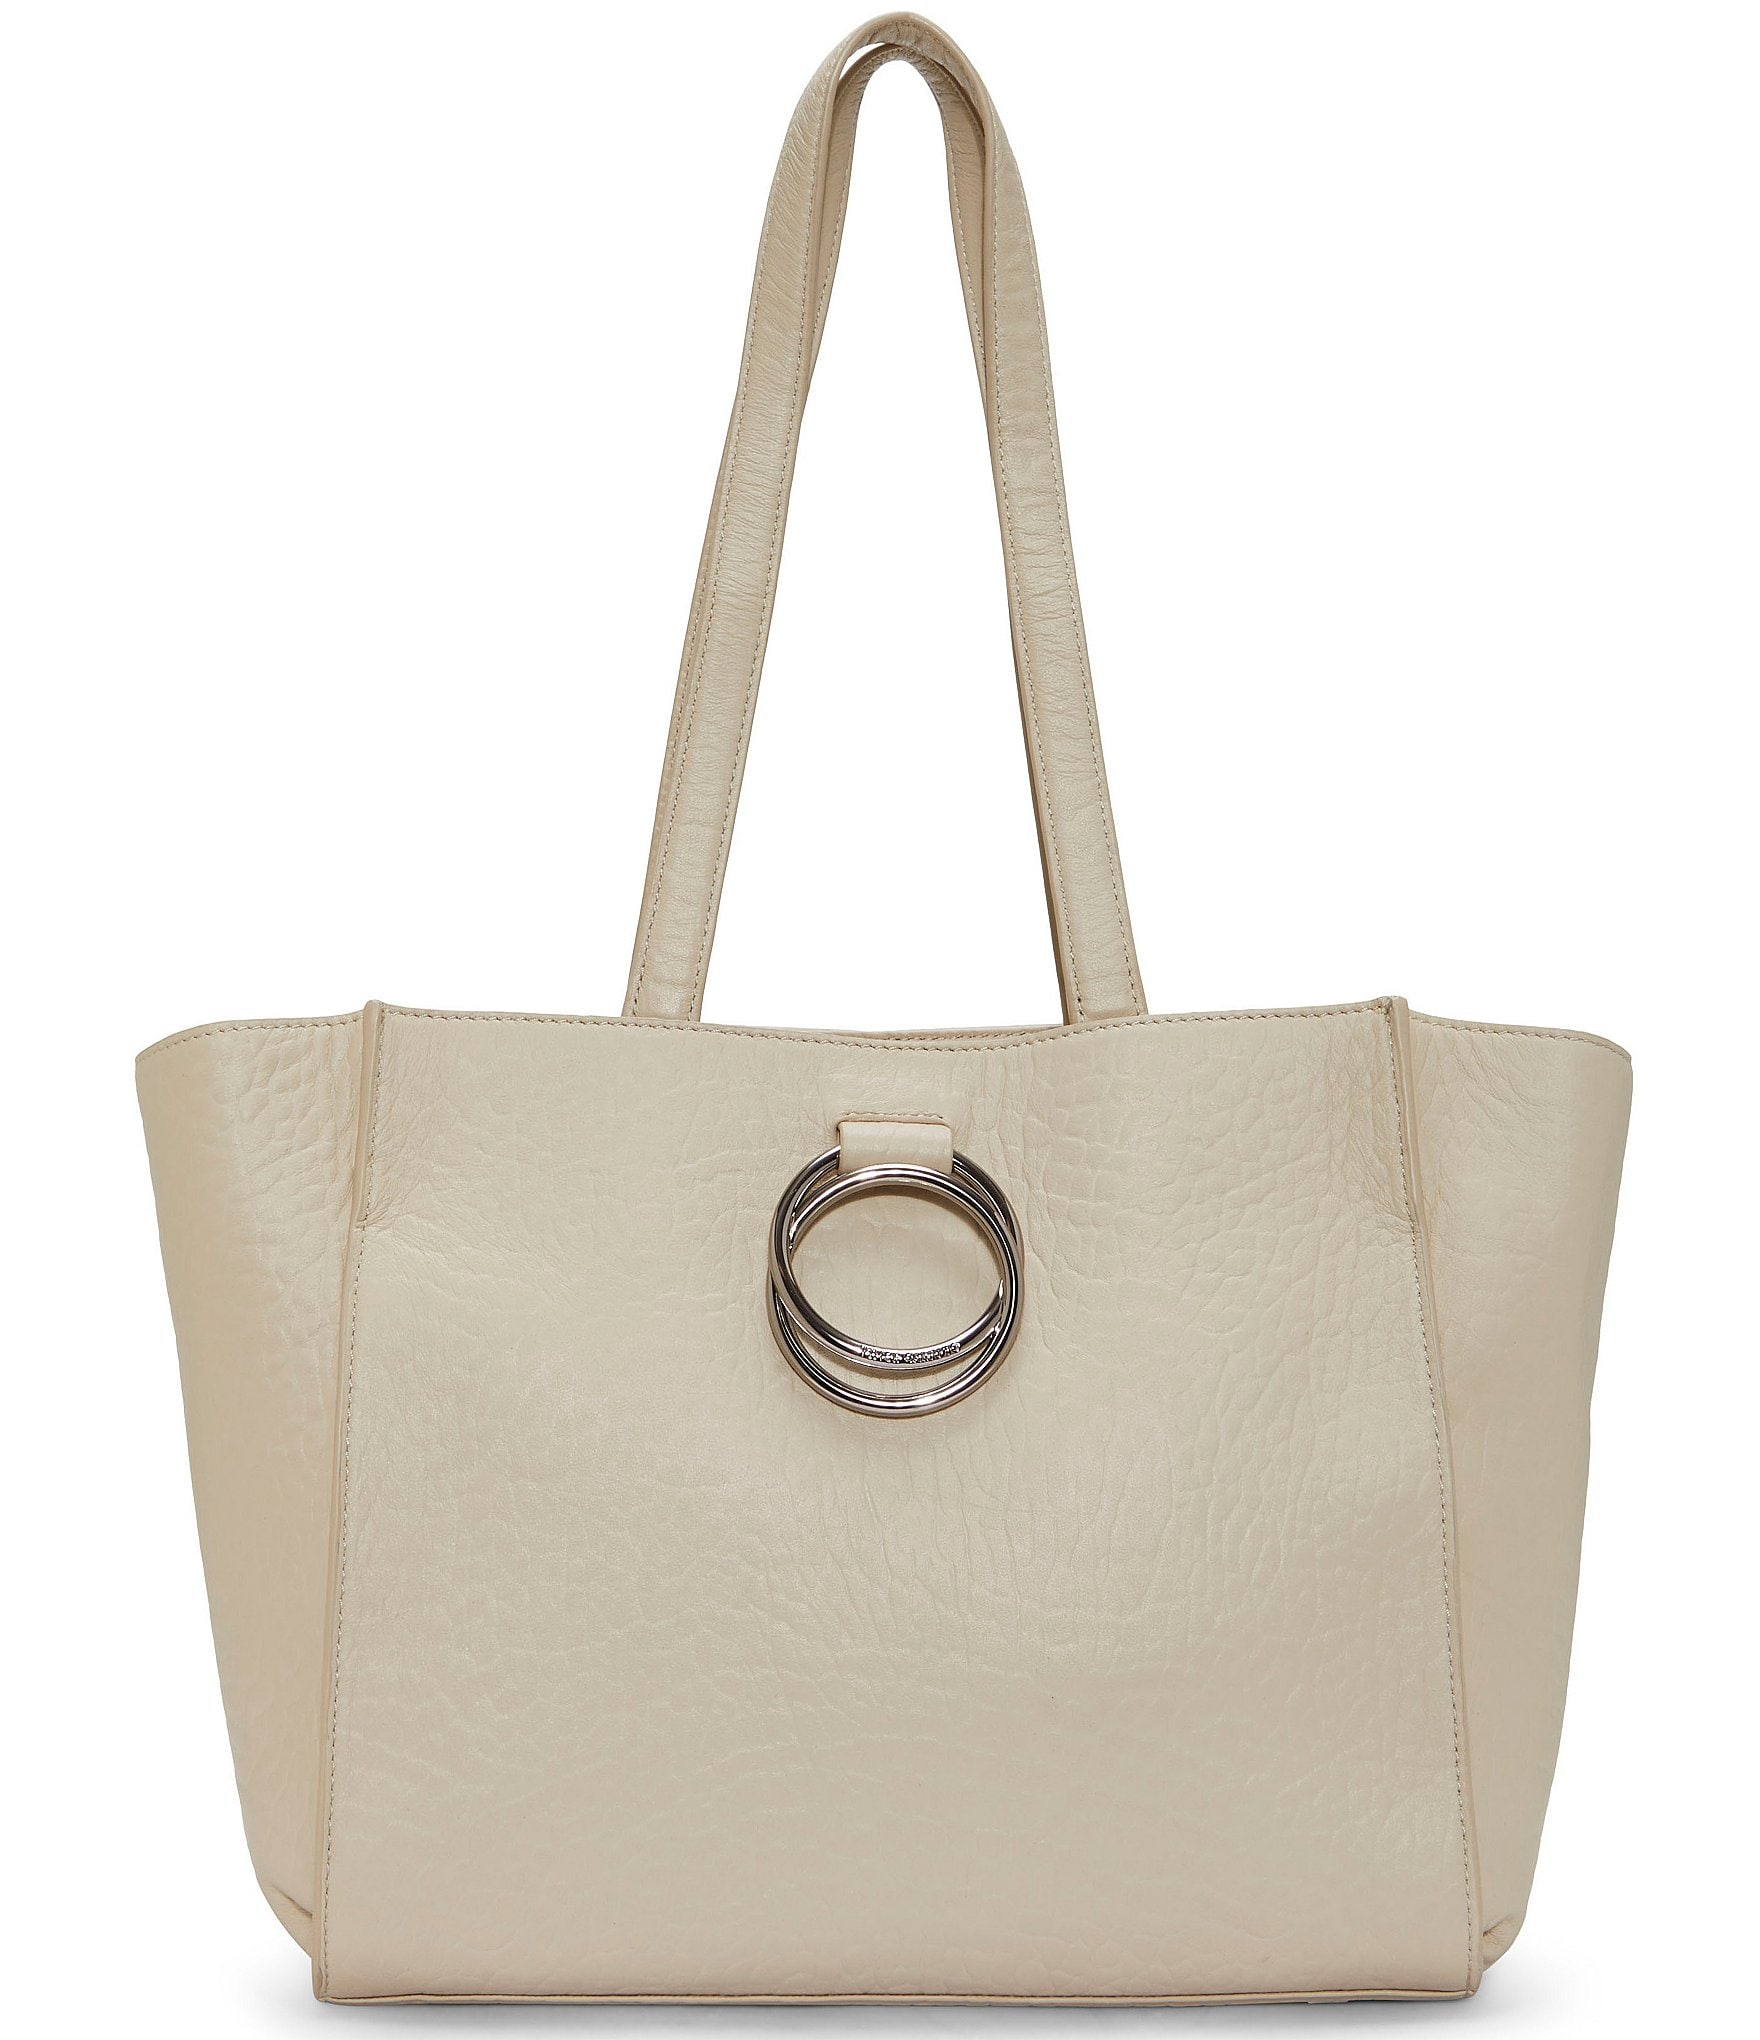 Vince Camuto Livy Pebbled Leather Tote Bag | Dillard's